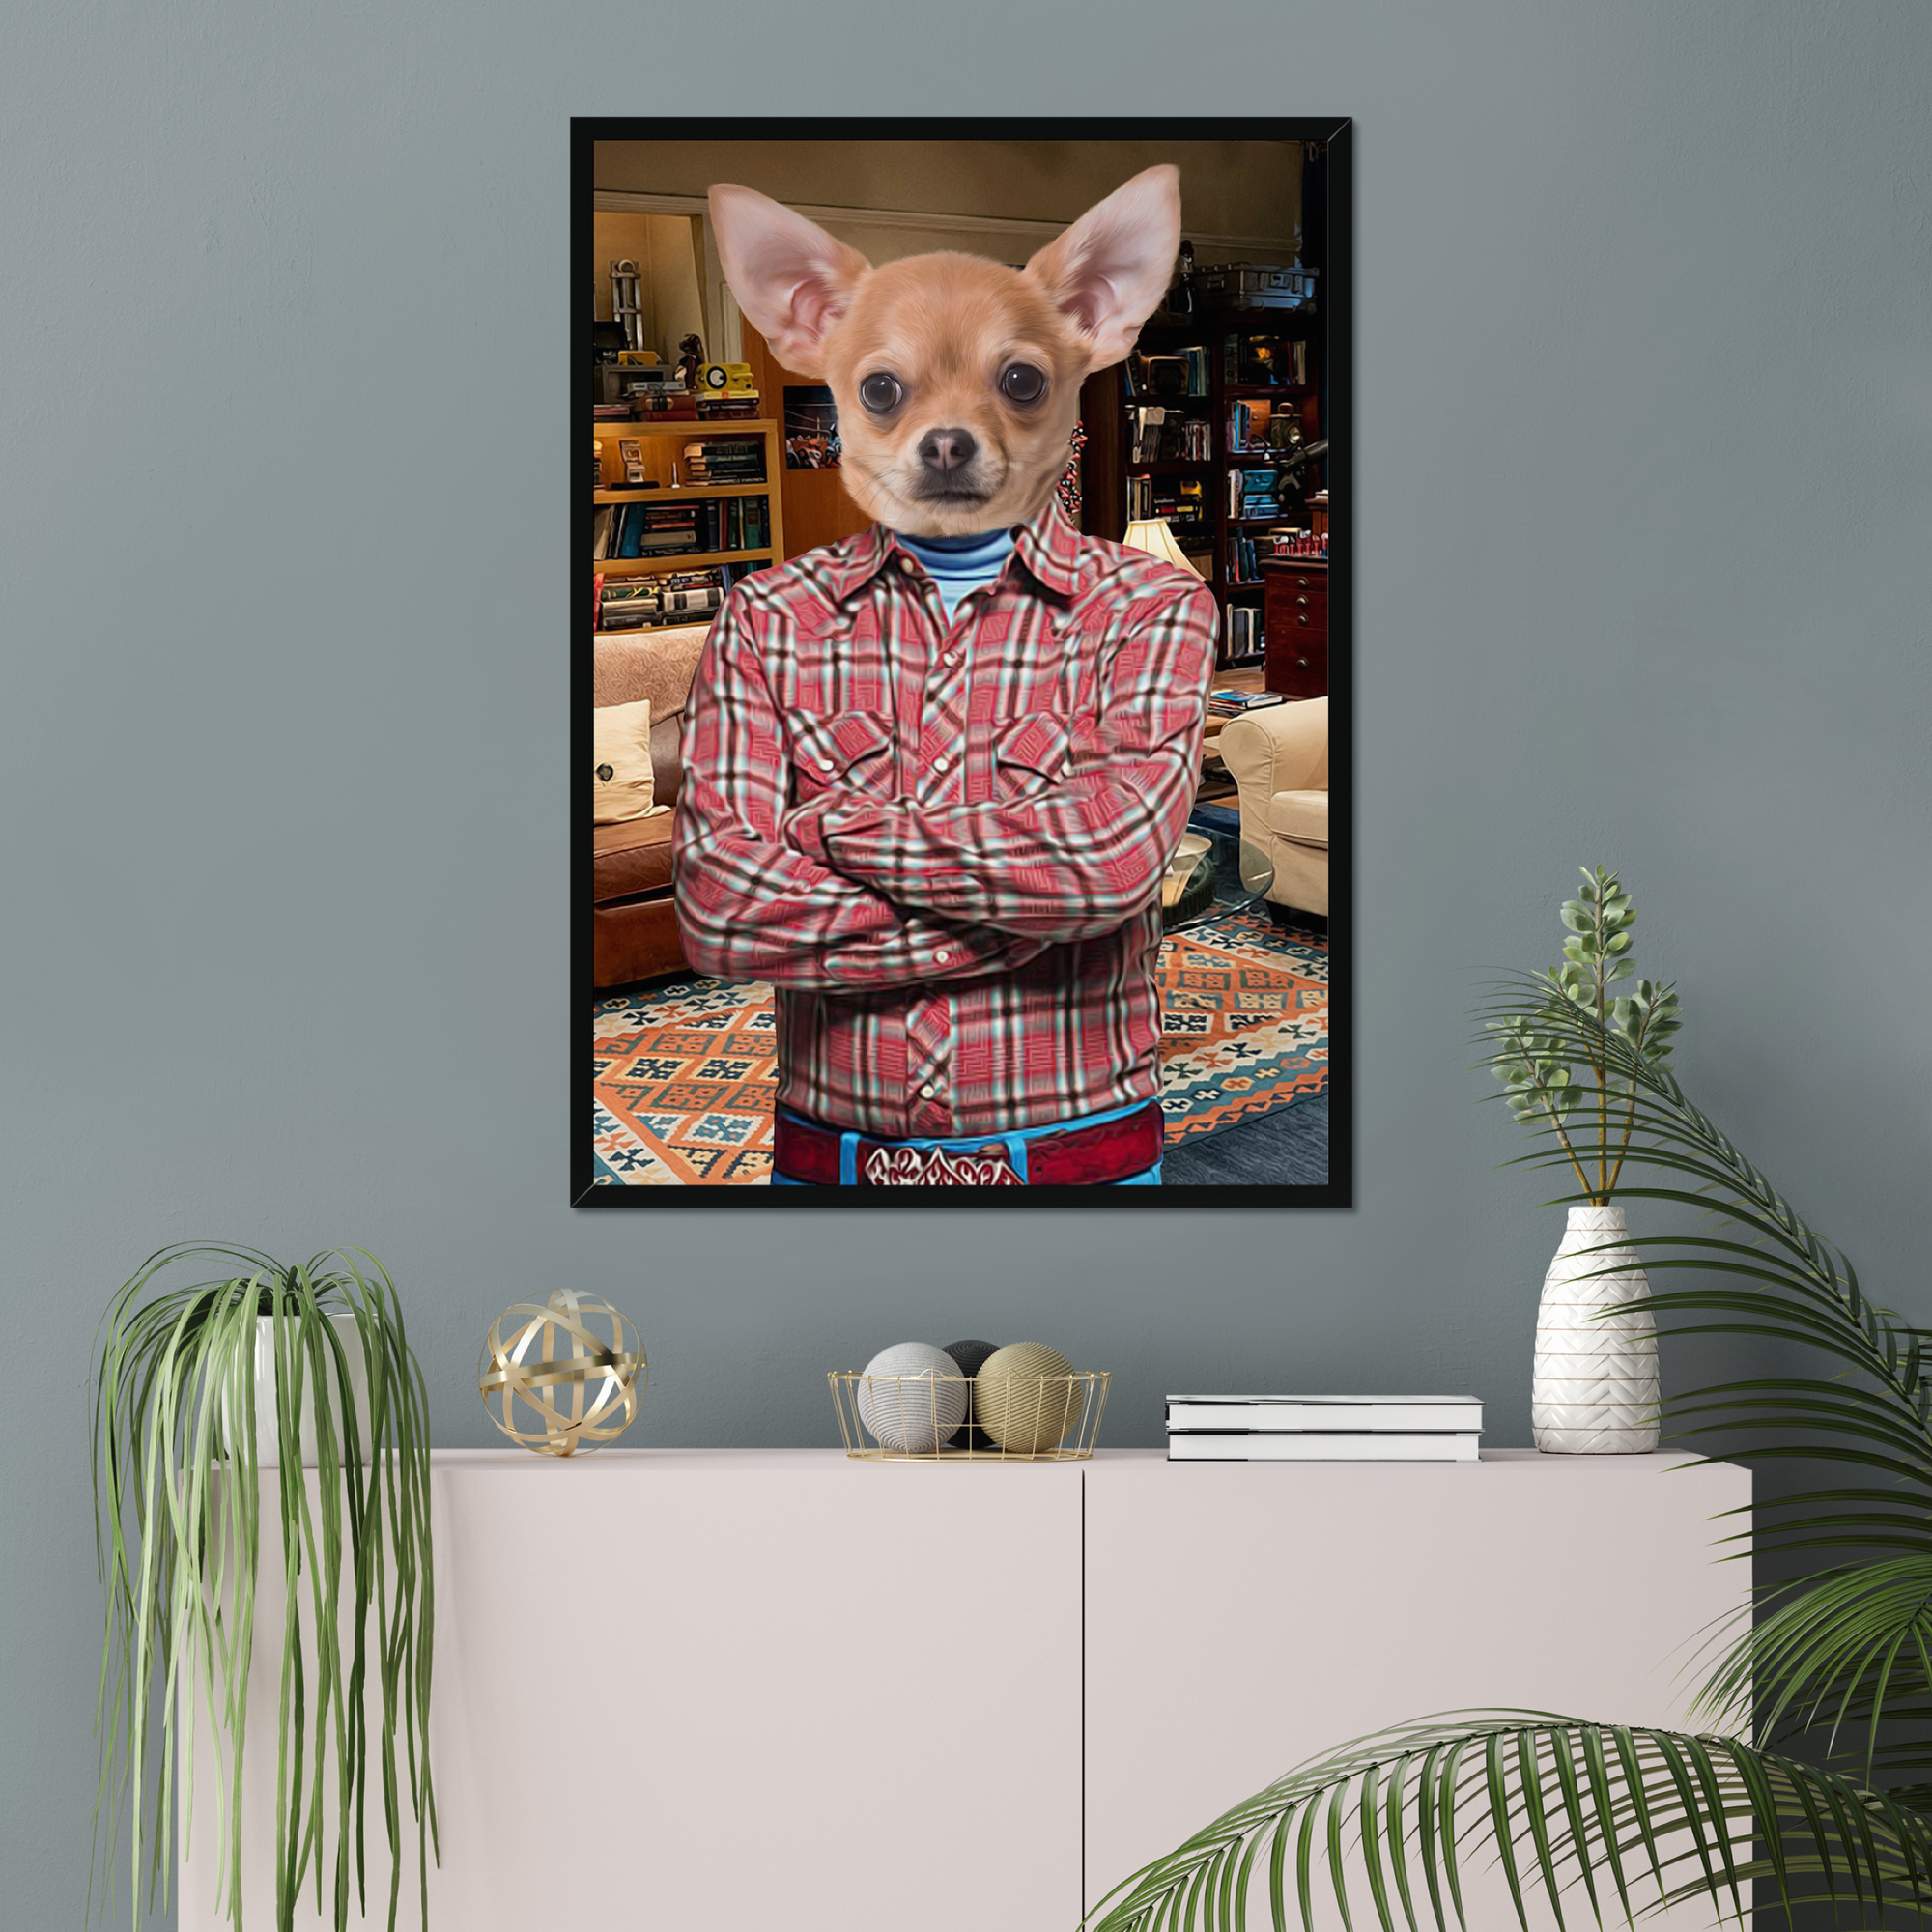 Paw & Glory, paw and glory, best dog artists, aristocrat dog painting, dog drawing from photo, pet portraits leeds, dog portrait background colors, drawing dog portraits, pet portrait